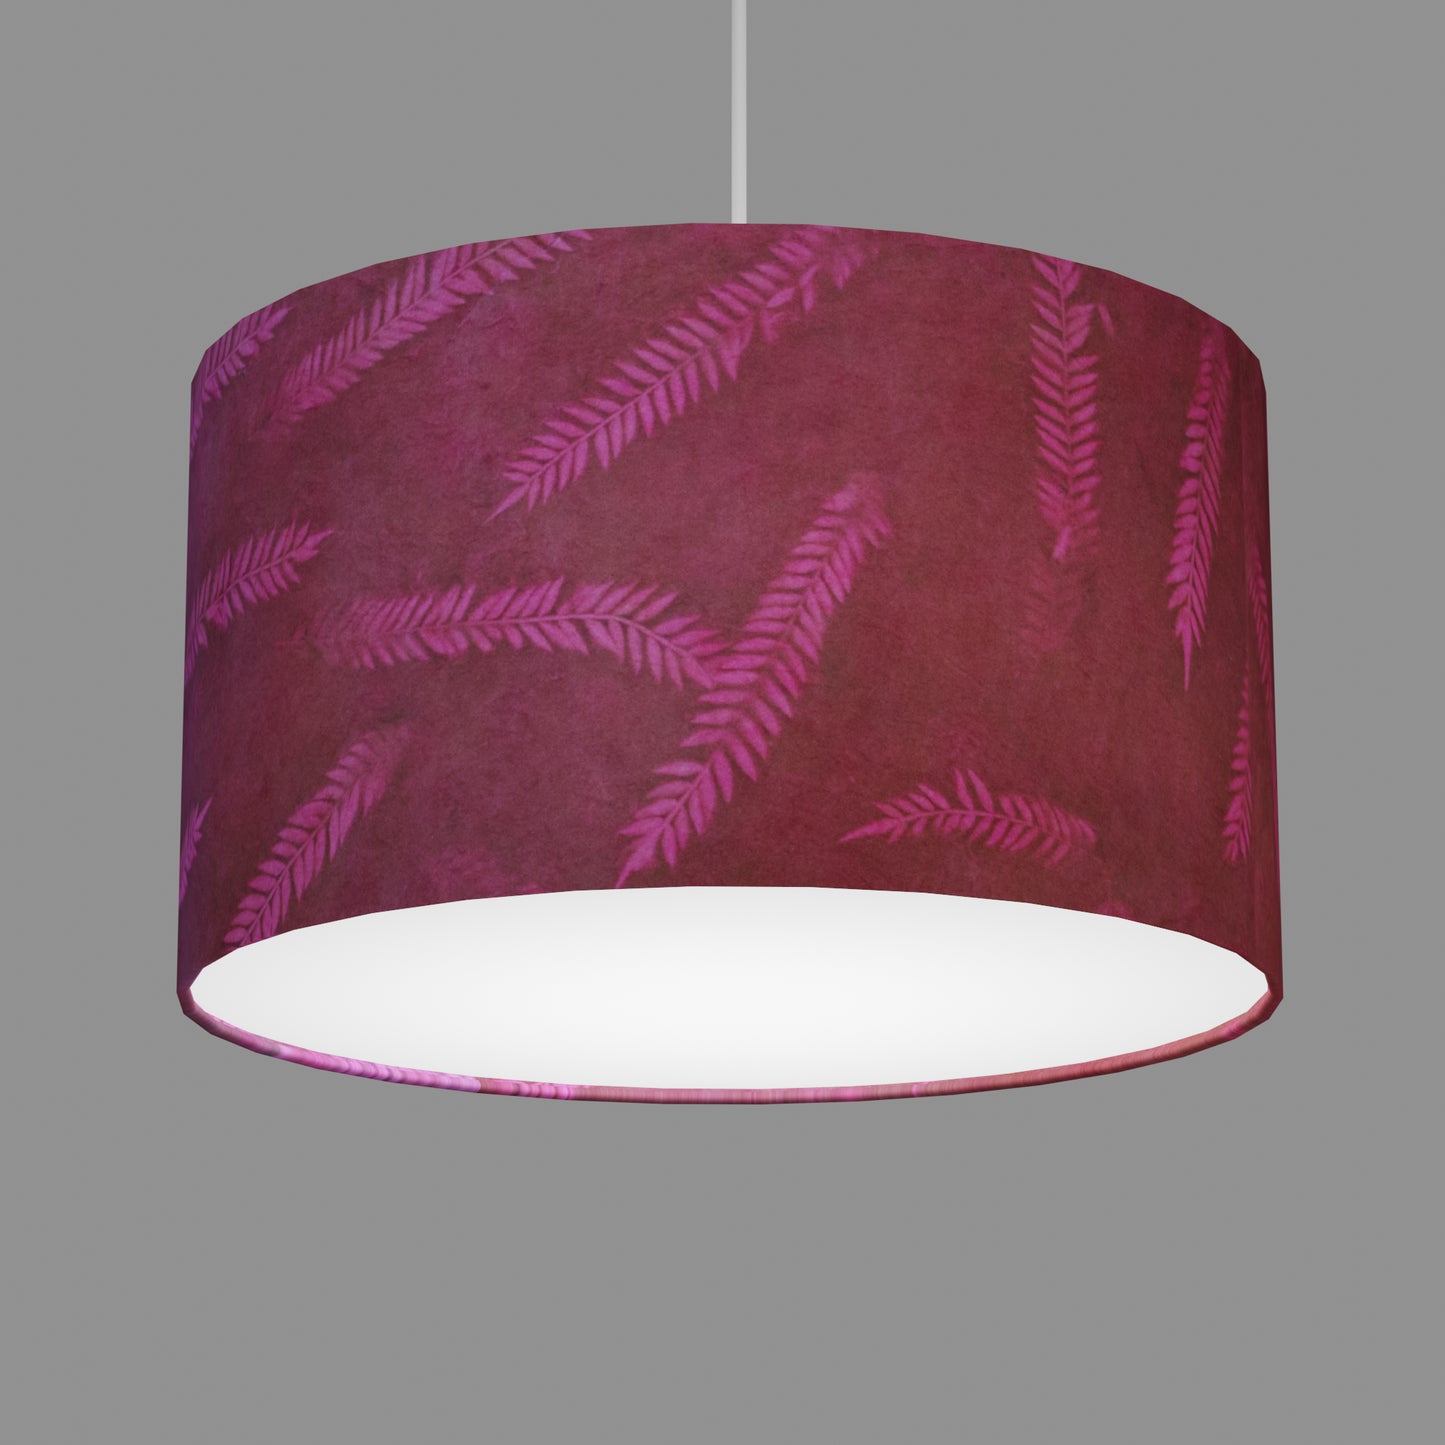 Drum Lamp Shade - P25 - Resistance Dyed Pink Fern, 35cm(d) x 20cm(h)